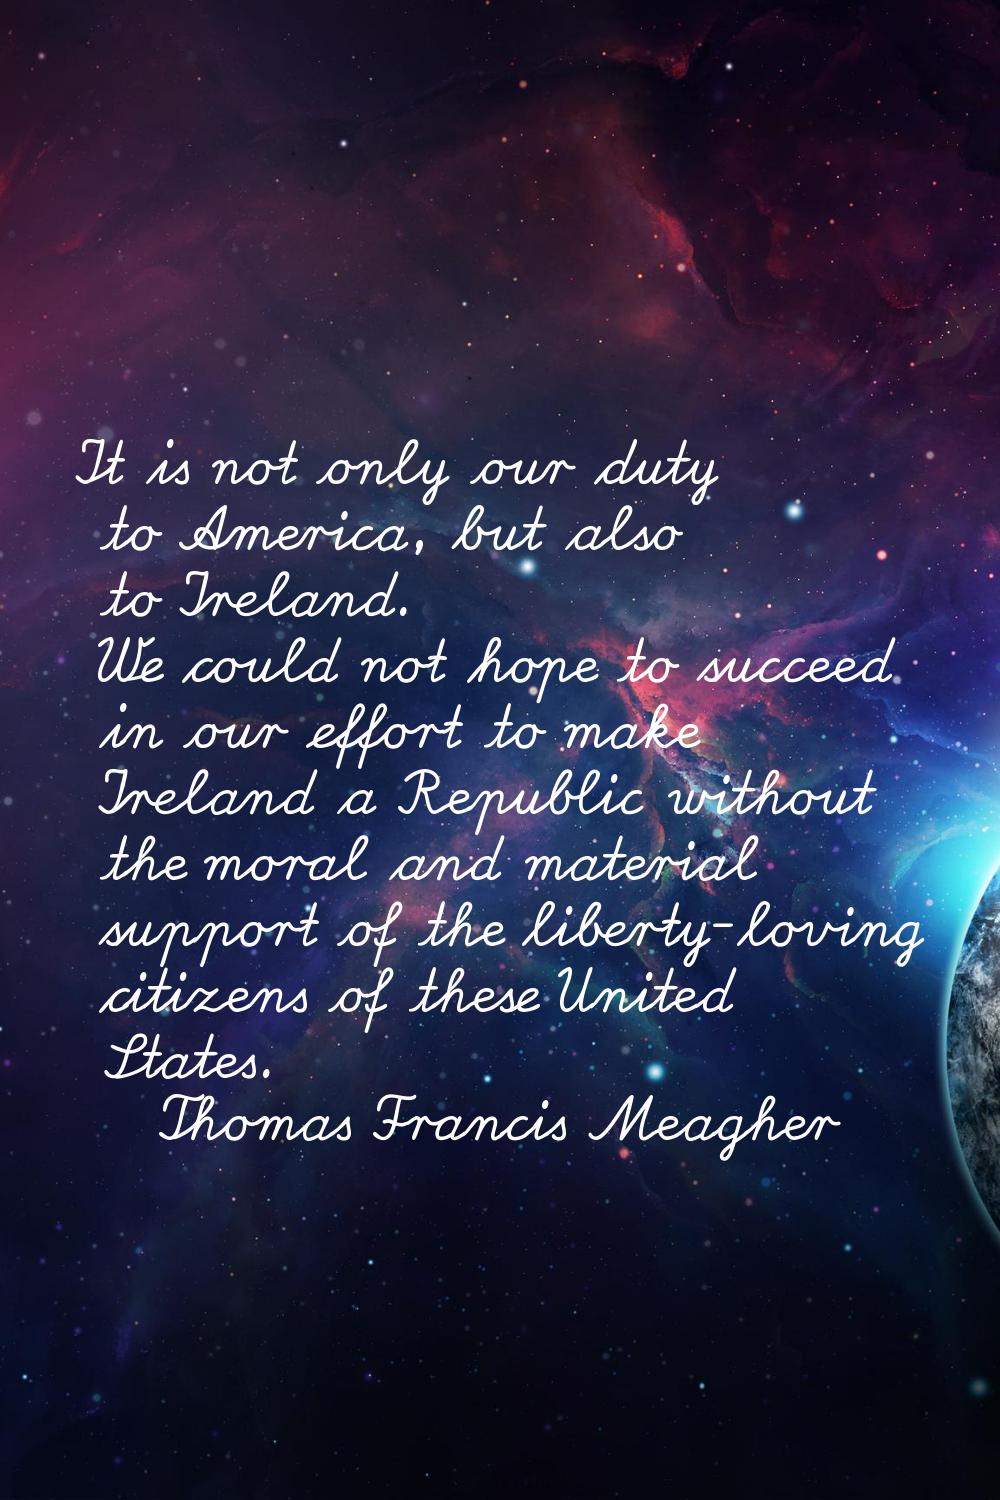 It is not only our duty to America, but also to Ireland. We could not hope to succeed in our effort